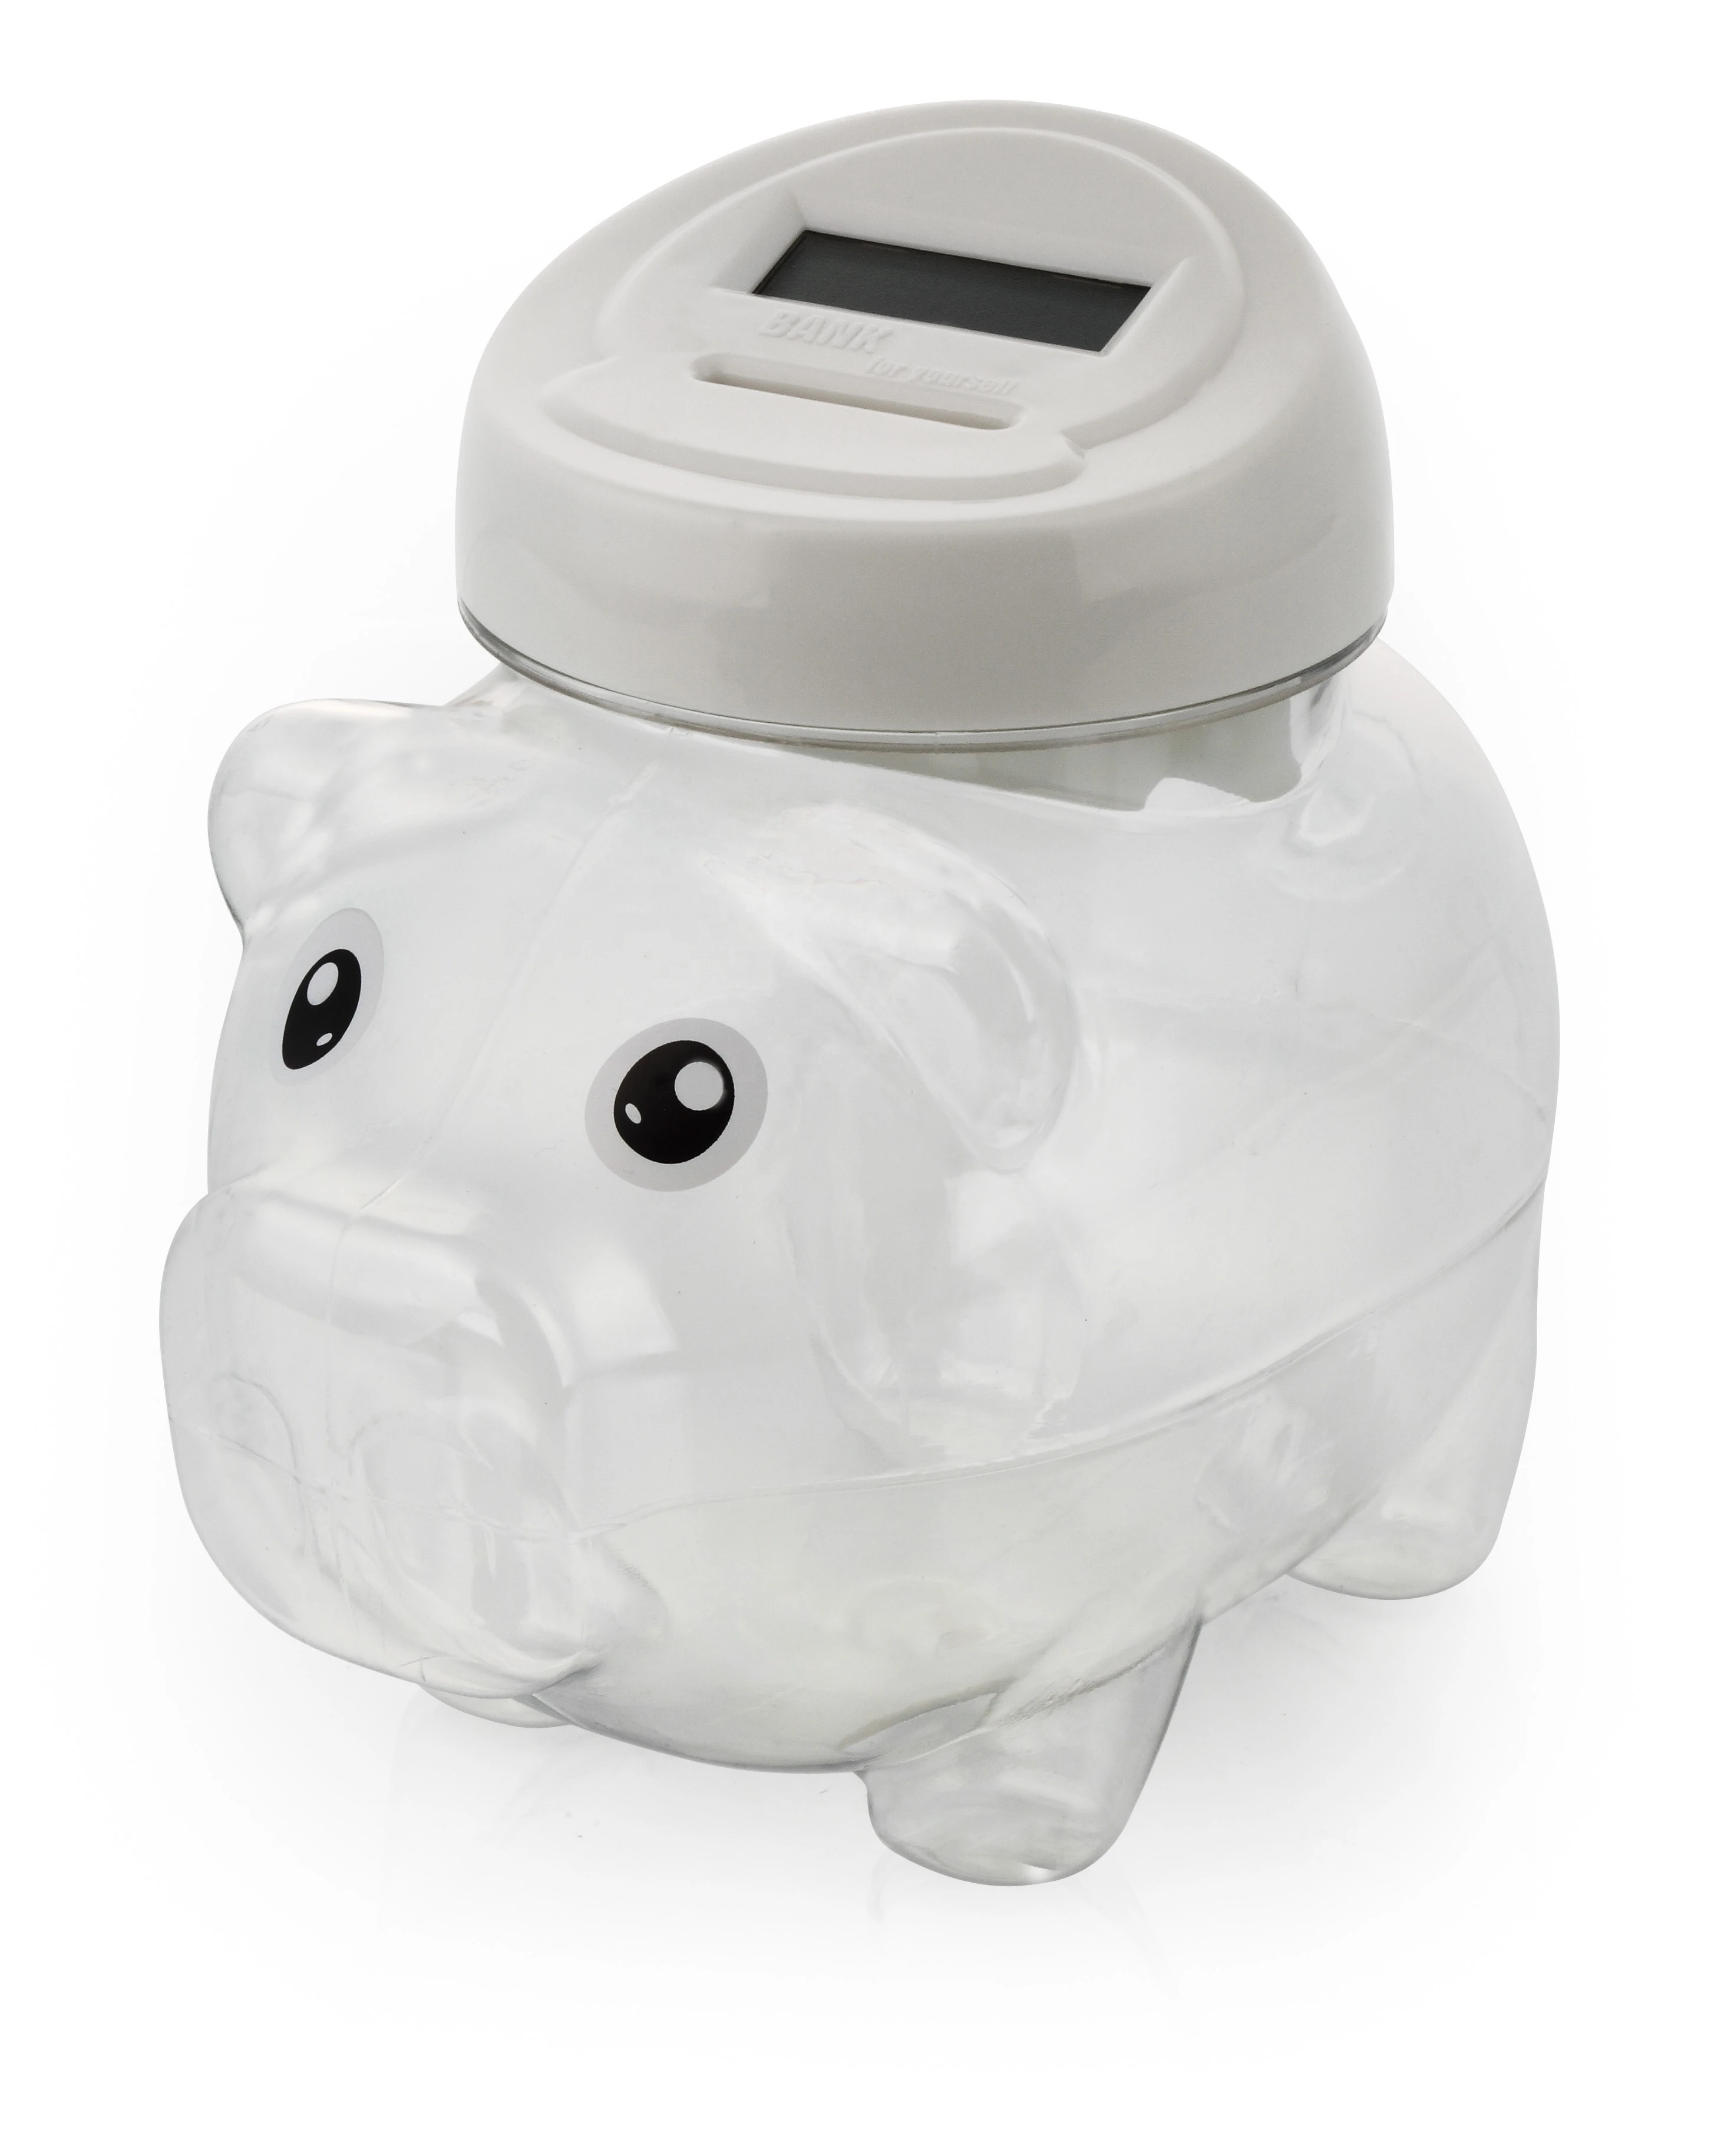 Amazon Best Sell Super Large Capacity Transparent Pig Shaped Plastic Coin Counting Money Bank For Children&#x27;s Gift